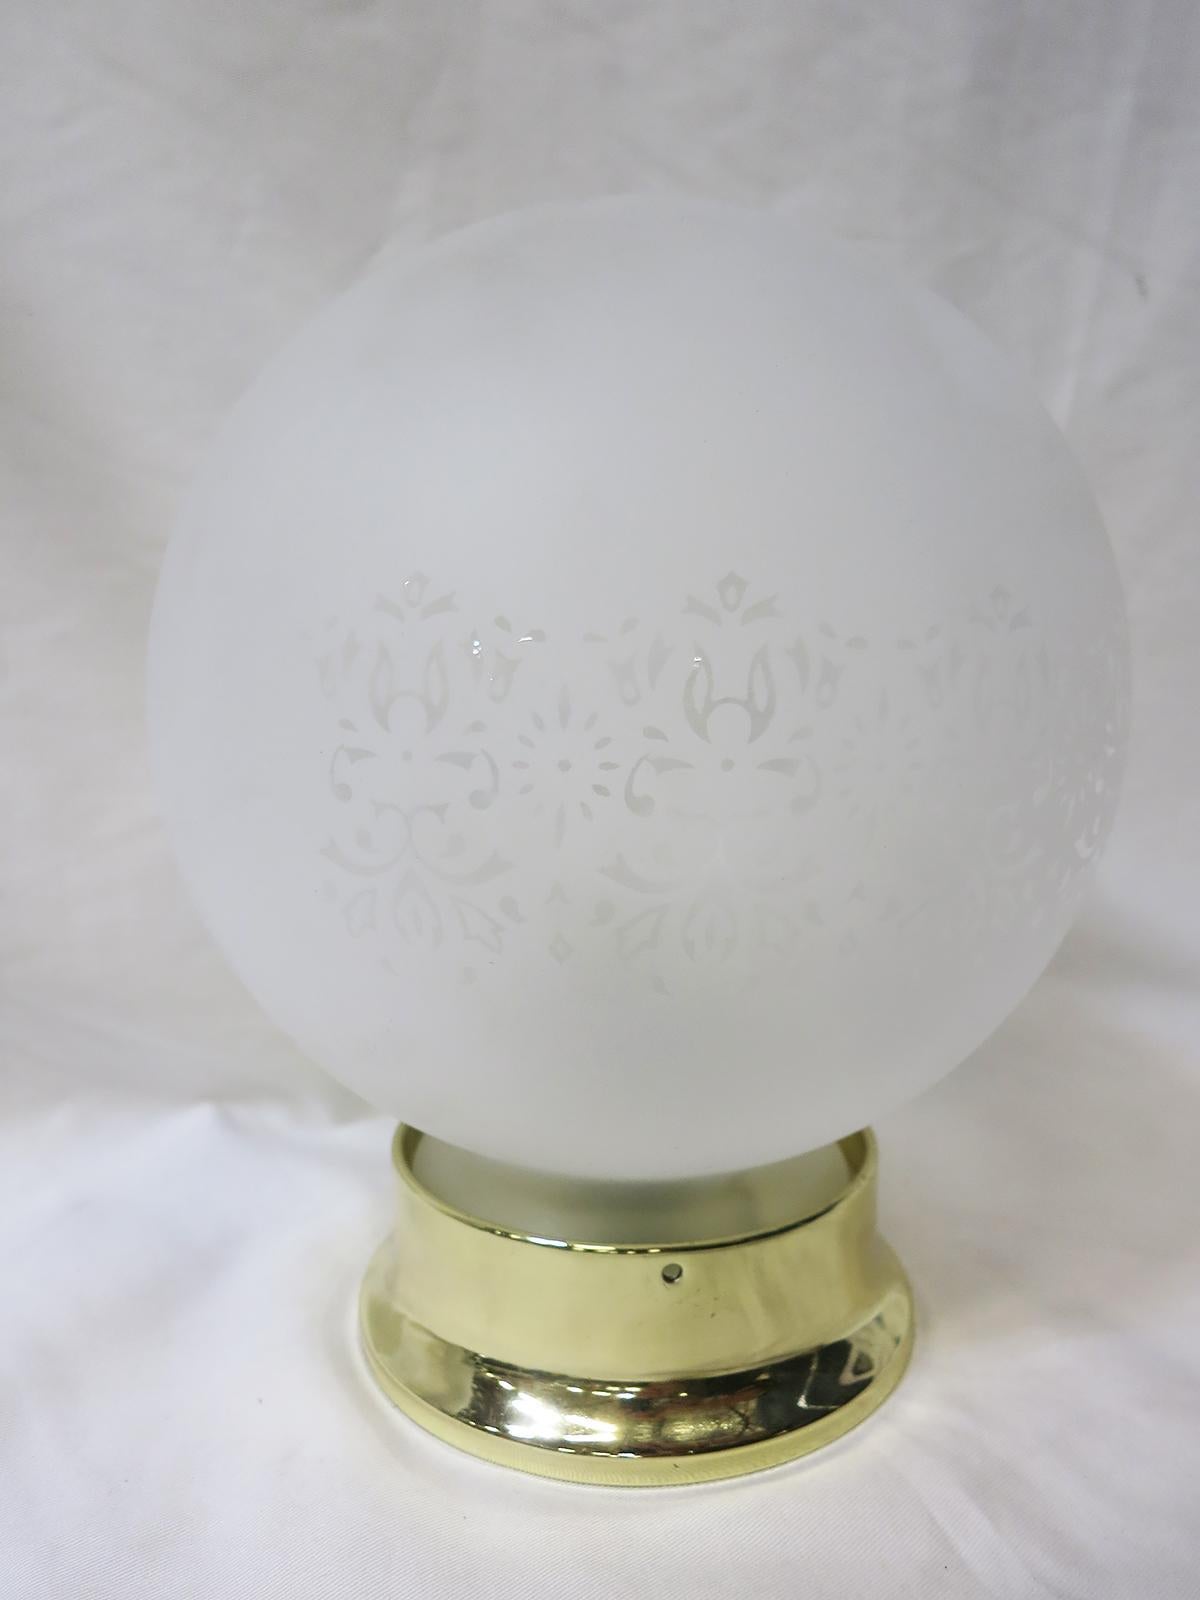 This unique and exquisite art nouveau-inspired satin glass globe features an etched floral garland pattern detail that will add endless charm to any home. Available with a new Brass or Chrome 4